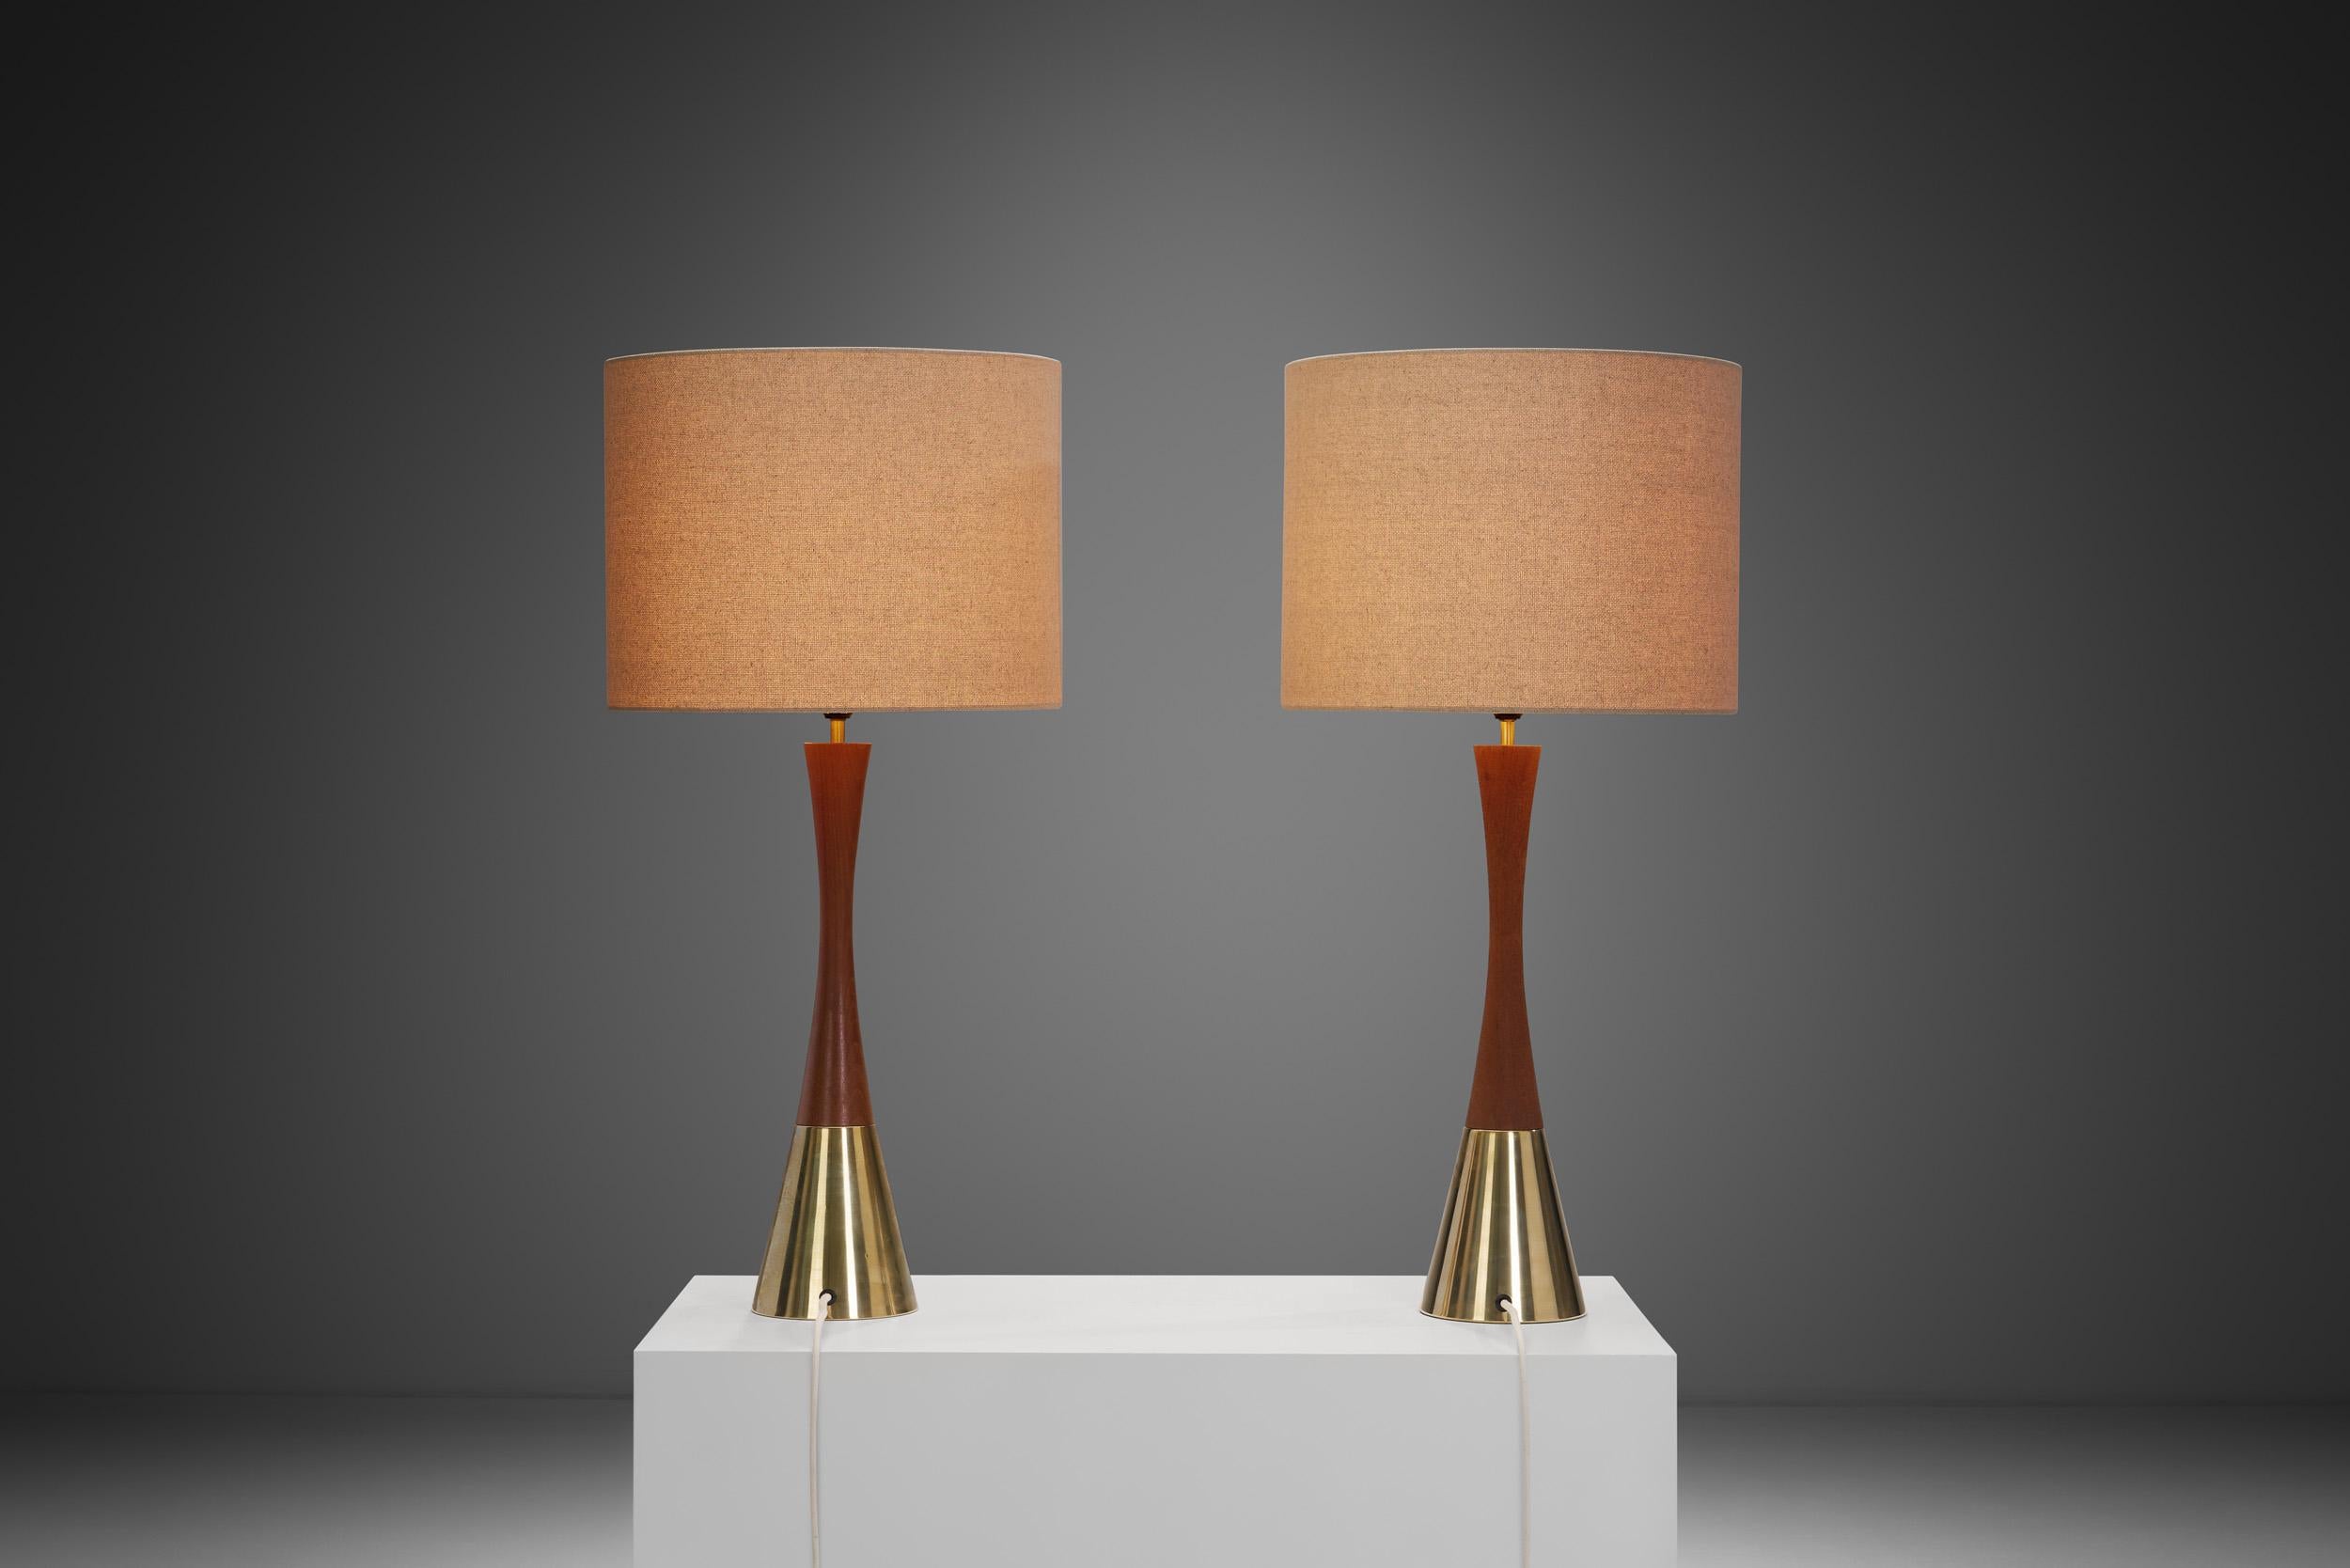 Late 20th Century Pair of Teak and Brass Table Lamps by Bergboms, Sweden ca 1970s For Sale